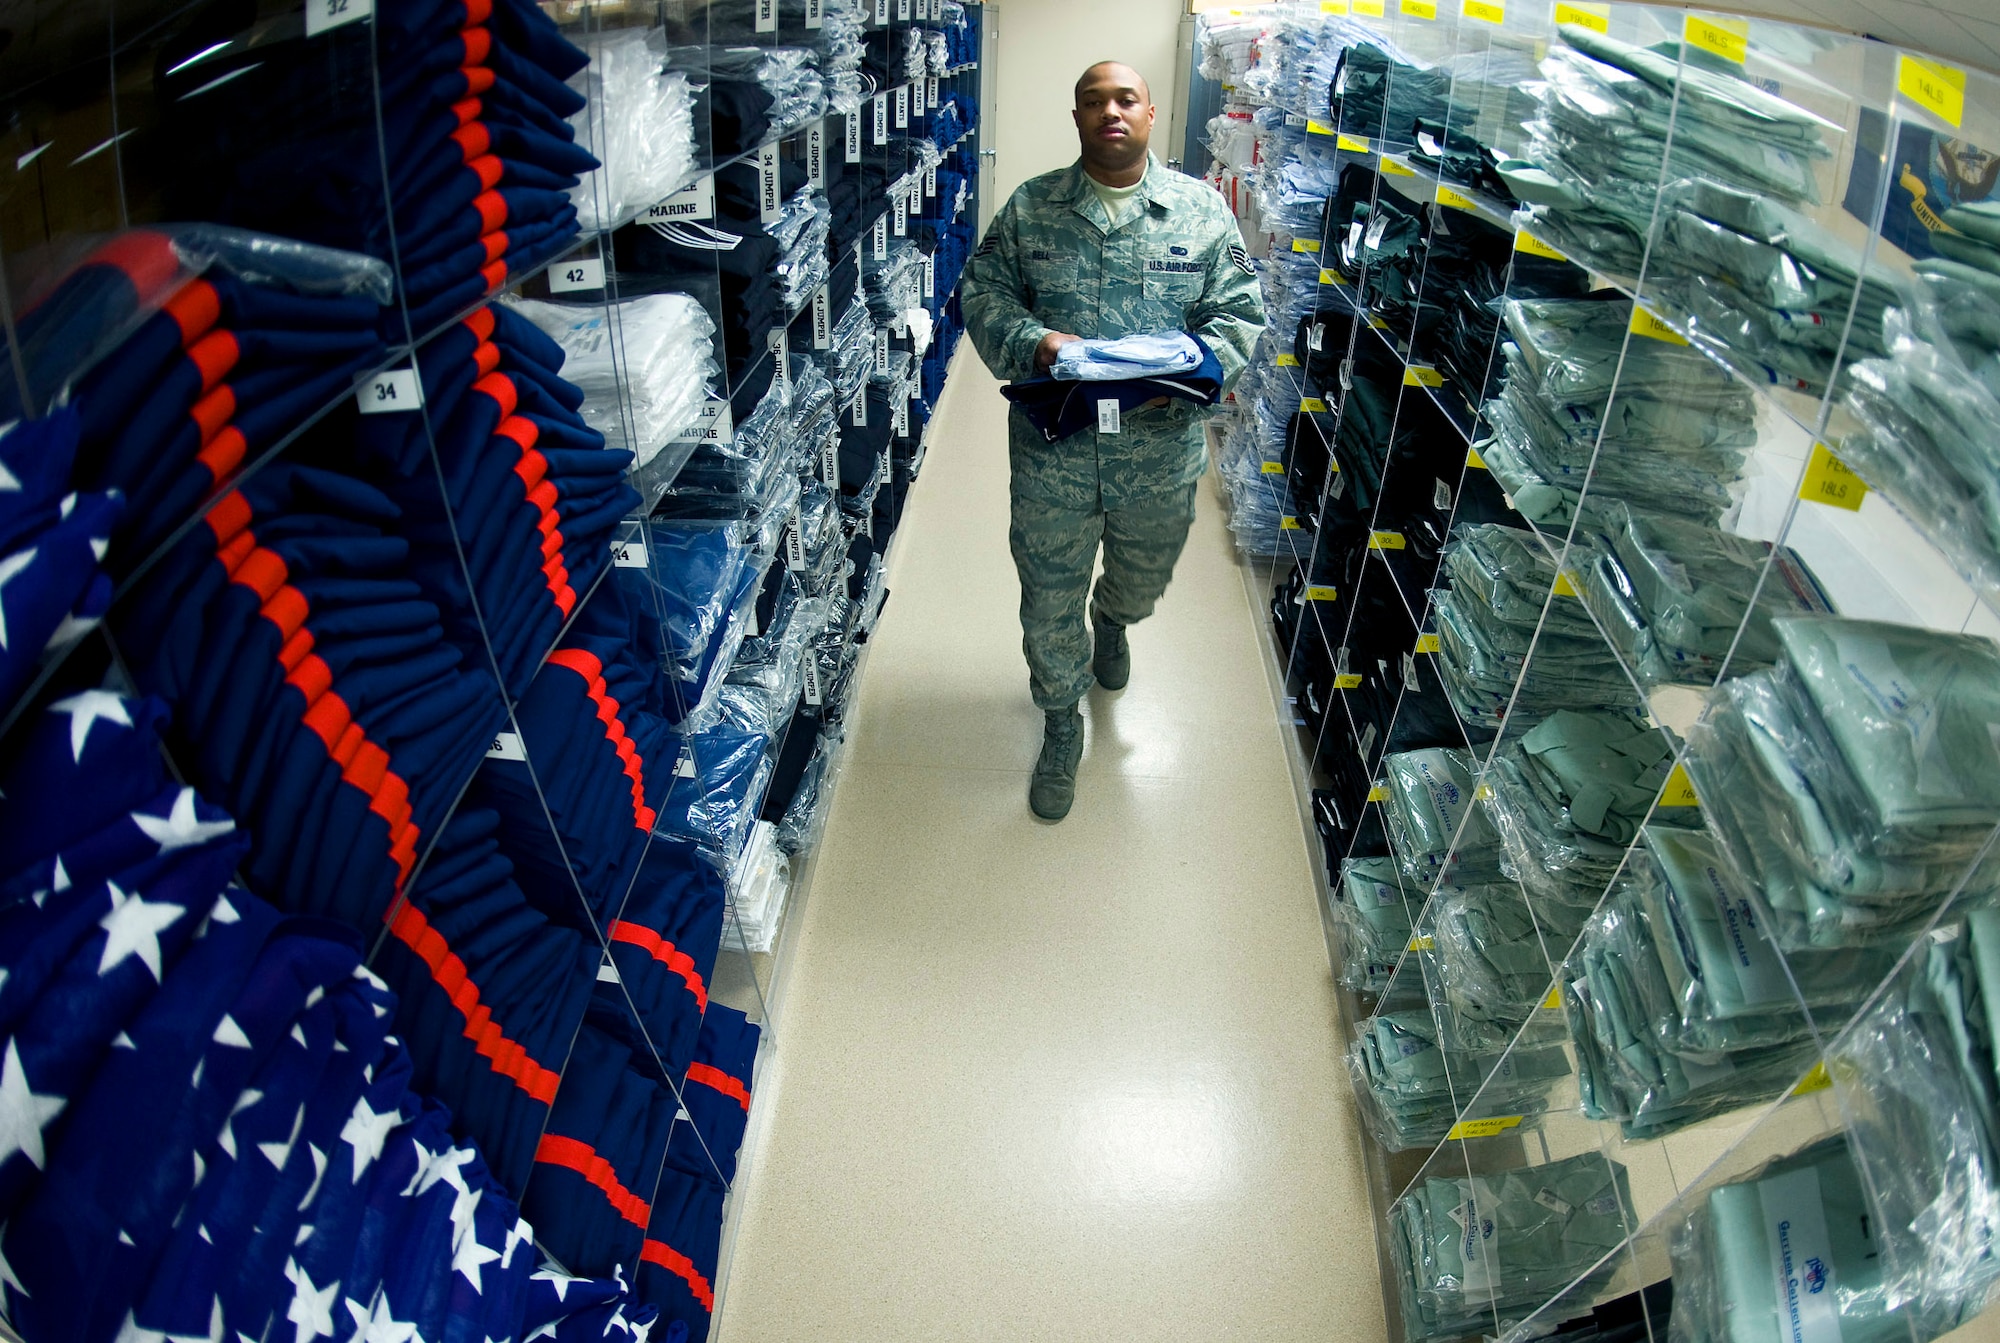 Staff Sgt. Charles Bell, a mortuary technician at the Air Force Mortuary Affairs Operations Center at Dover Air Force Base, Del., walks through rows of military service dress uniforms that are stored there for every rank and size. Sgt. Bell is the Air Force non-commisioned officer in charge of logistics and oversees ordering and stocking service dress uniforms and items for dignified transfer of remains.  (U.S. Air Force photo/Staff Sgt. Bennie J. Davis III)